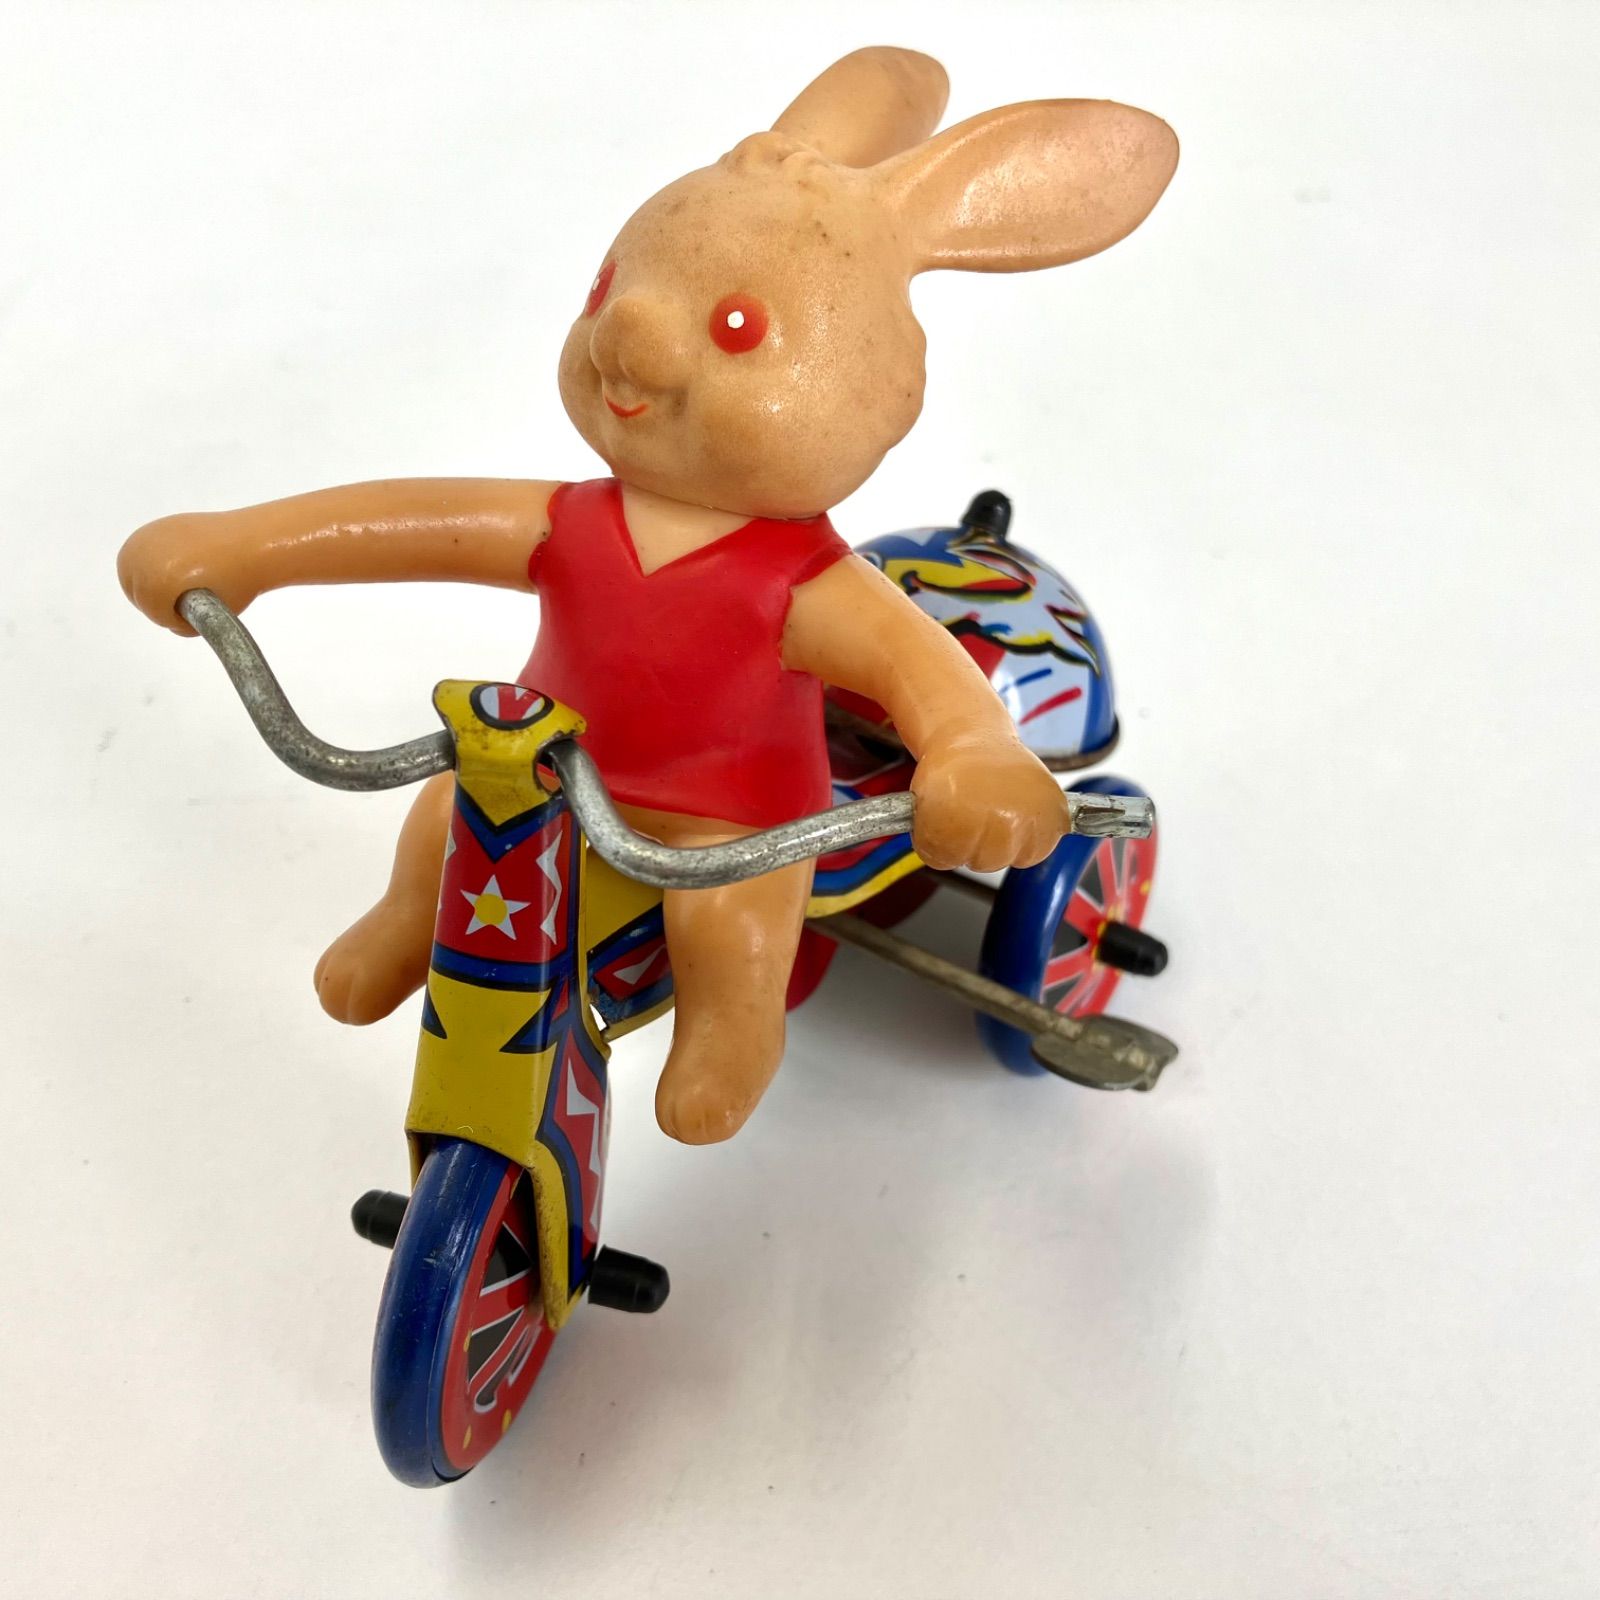 758113】 Bunny Tricycle ブリキ 三輪うさぎ 普通品 - イーストック